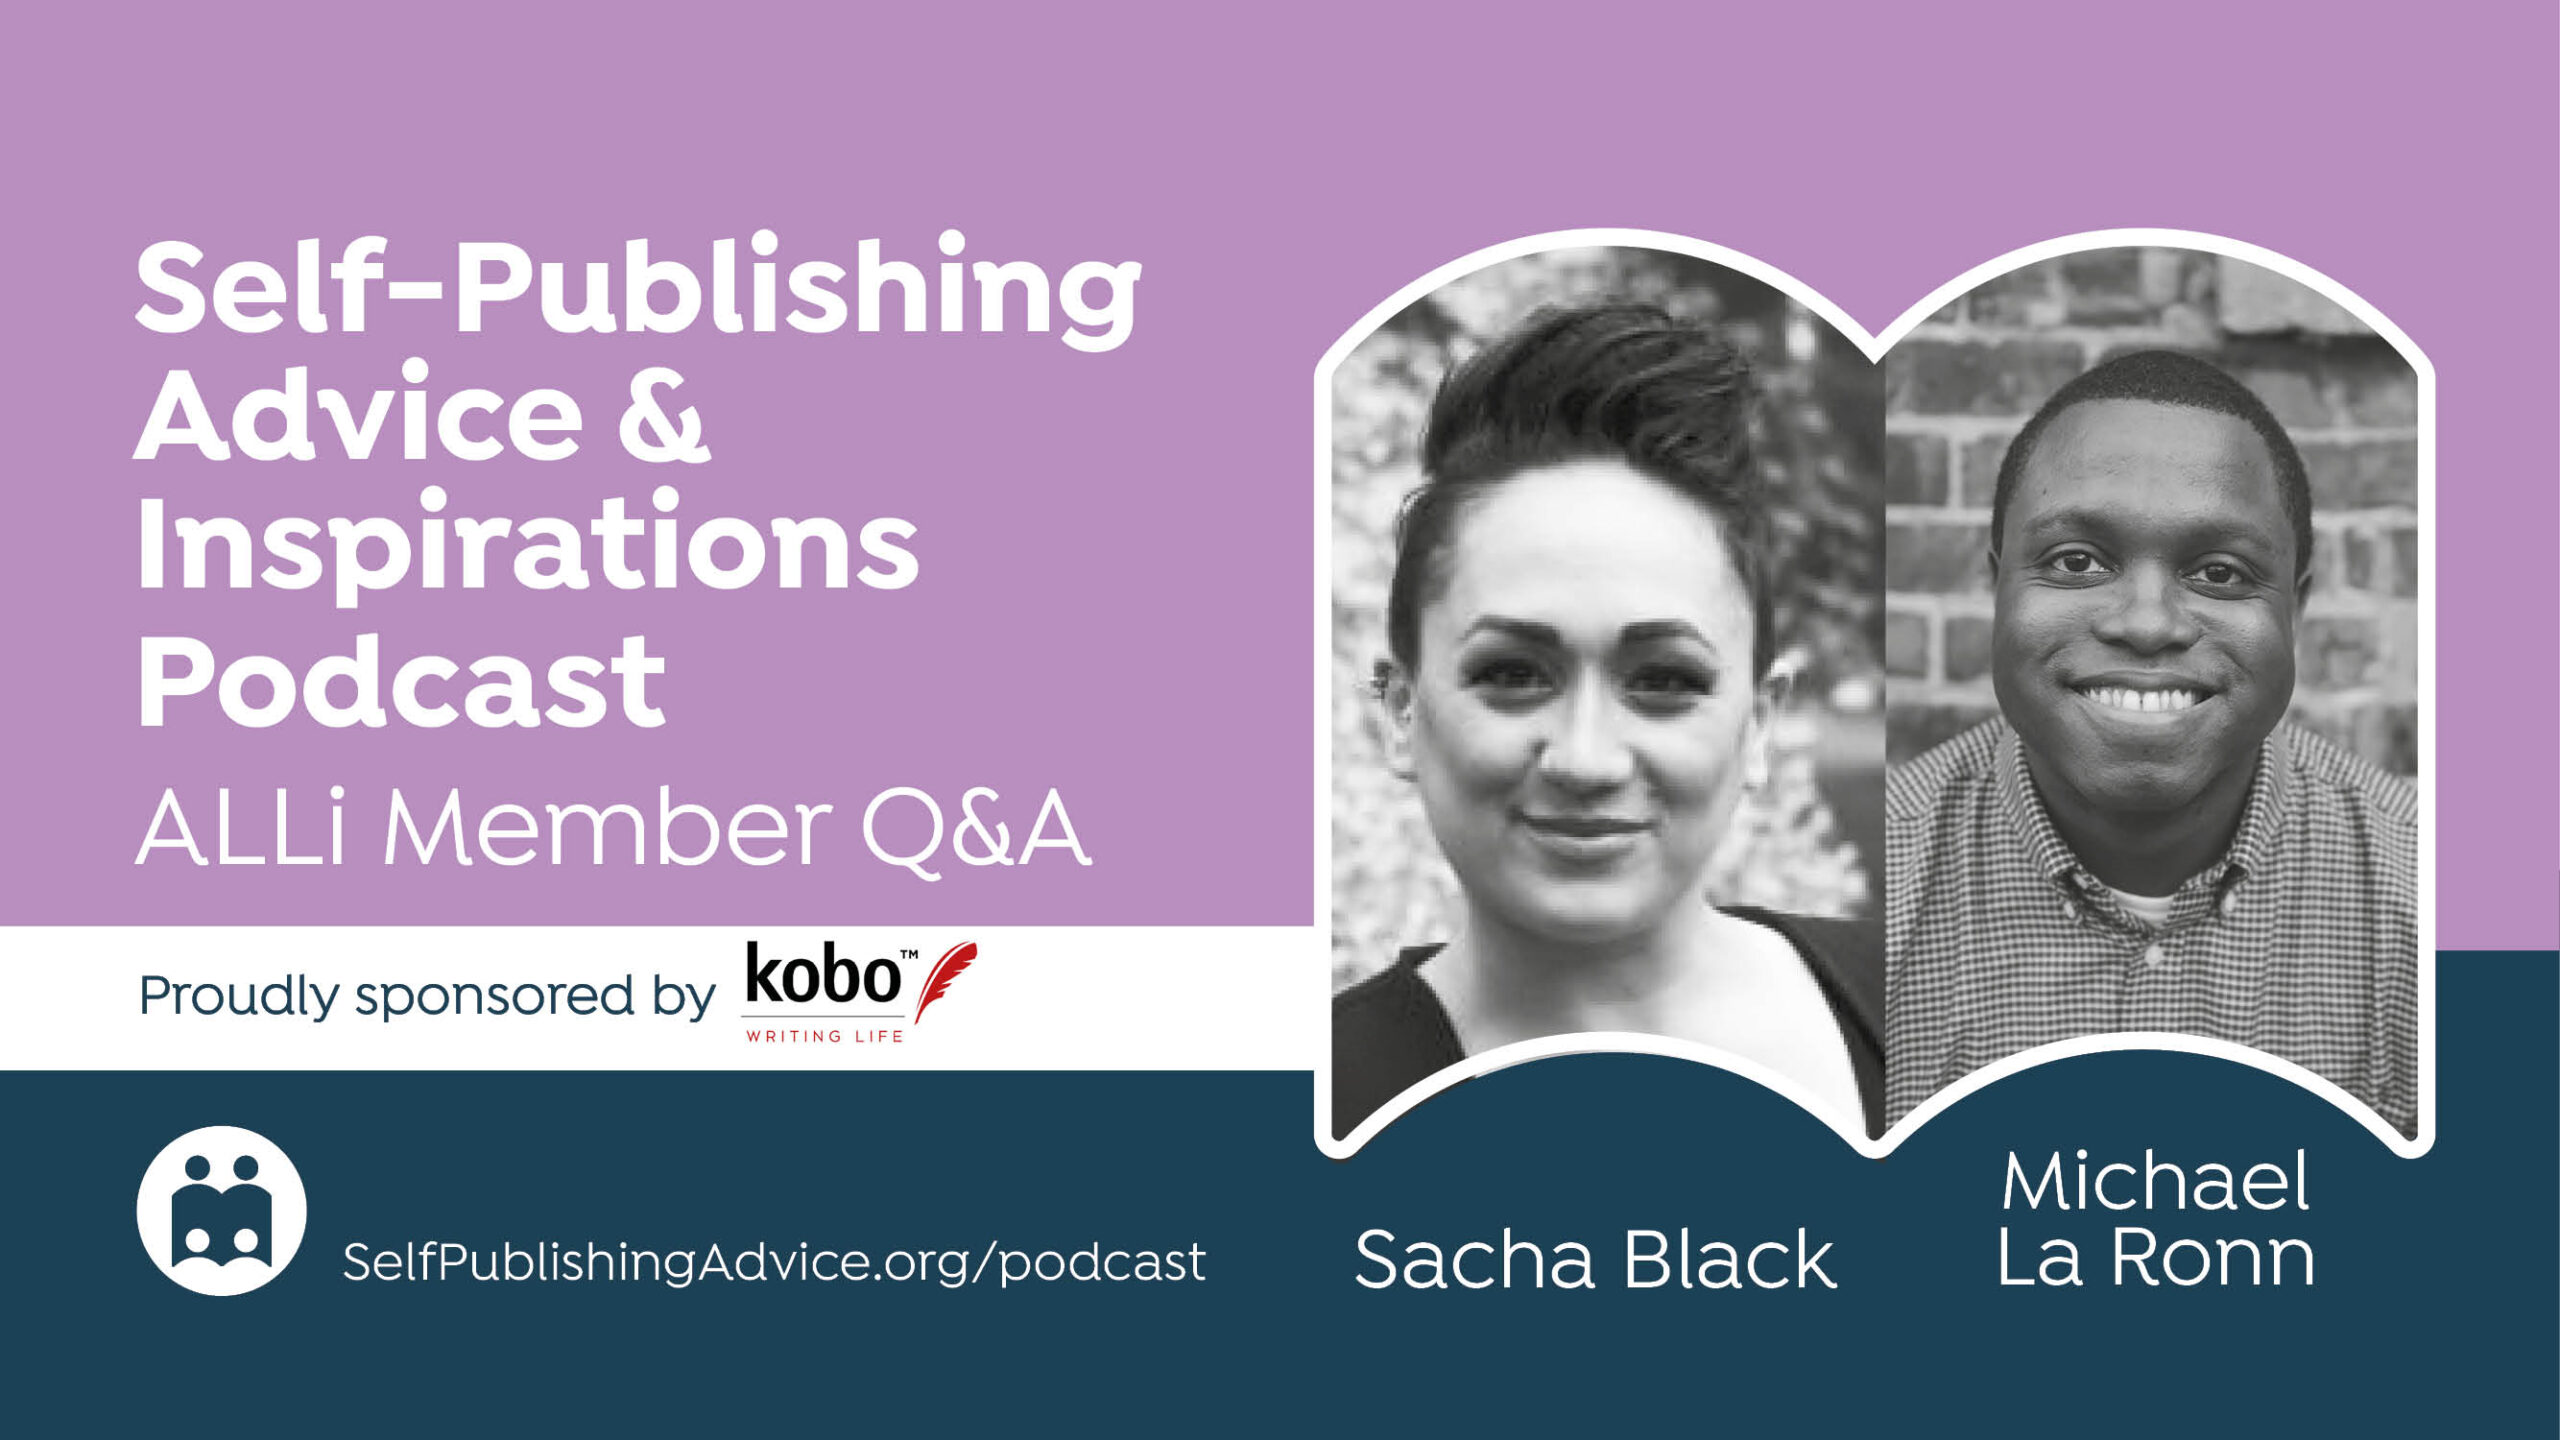 Ad Coaches, Anonymous Ratings, Barcodes, And More Questions Answered By Orna Ross And Sacha Black In Our Member Q&A Podcast